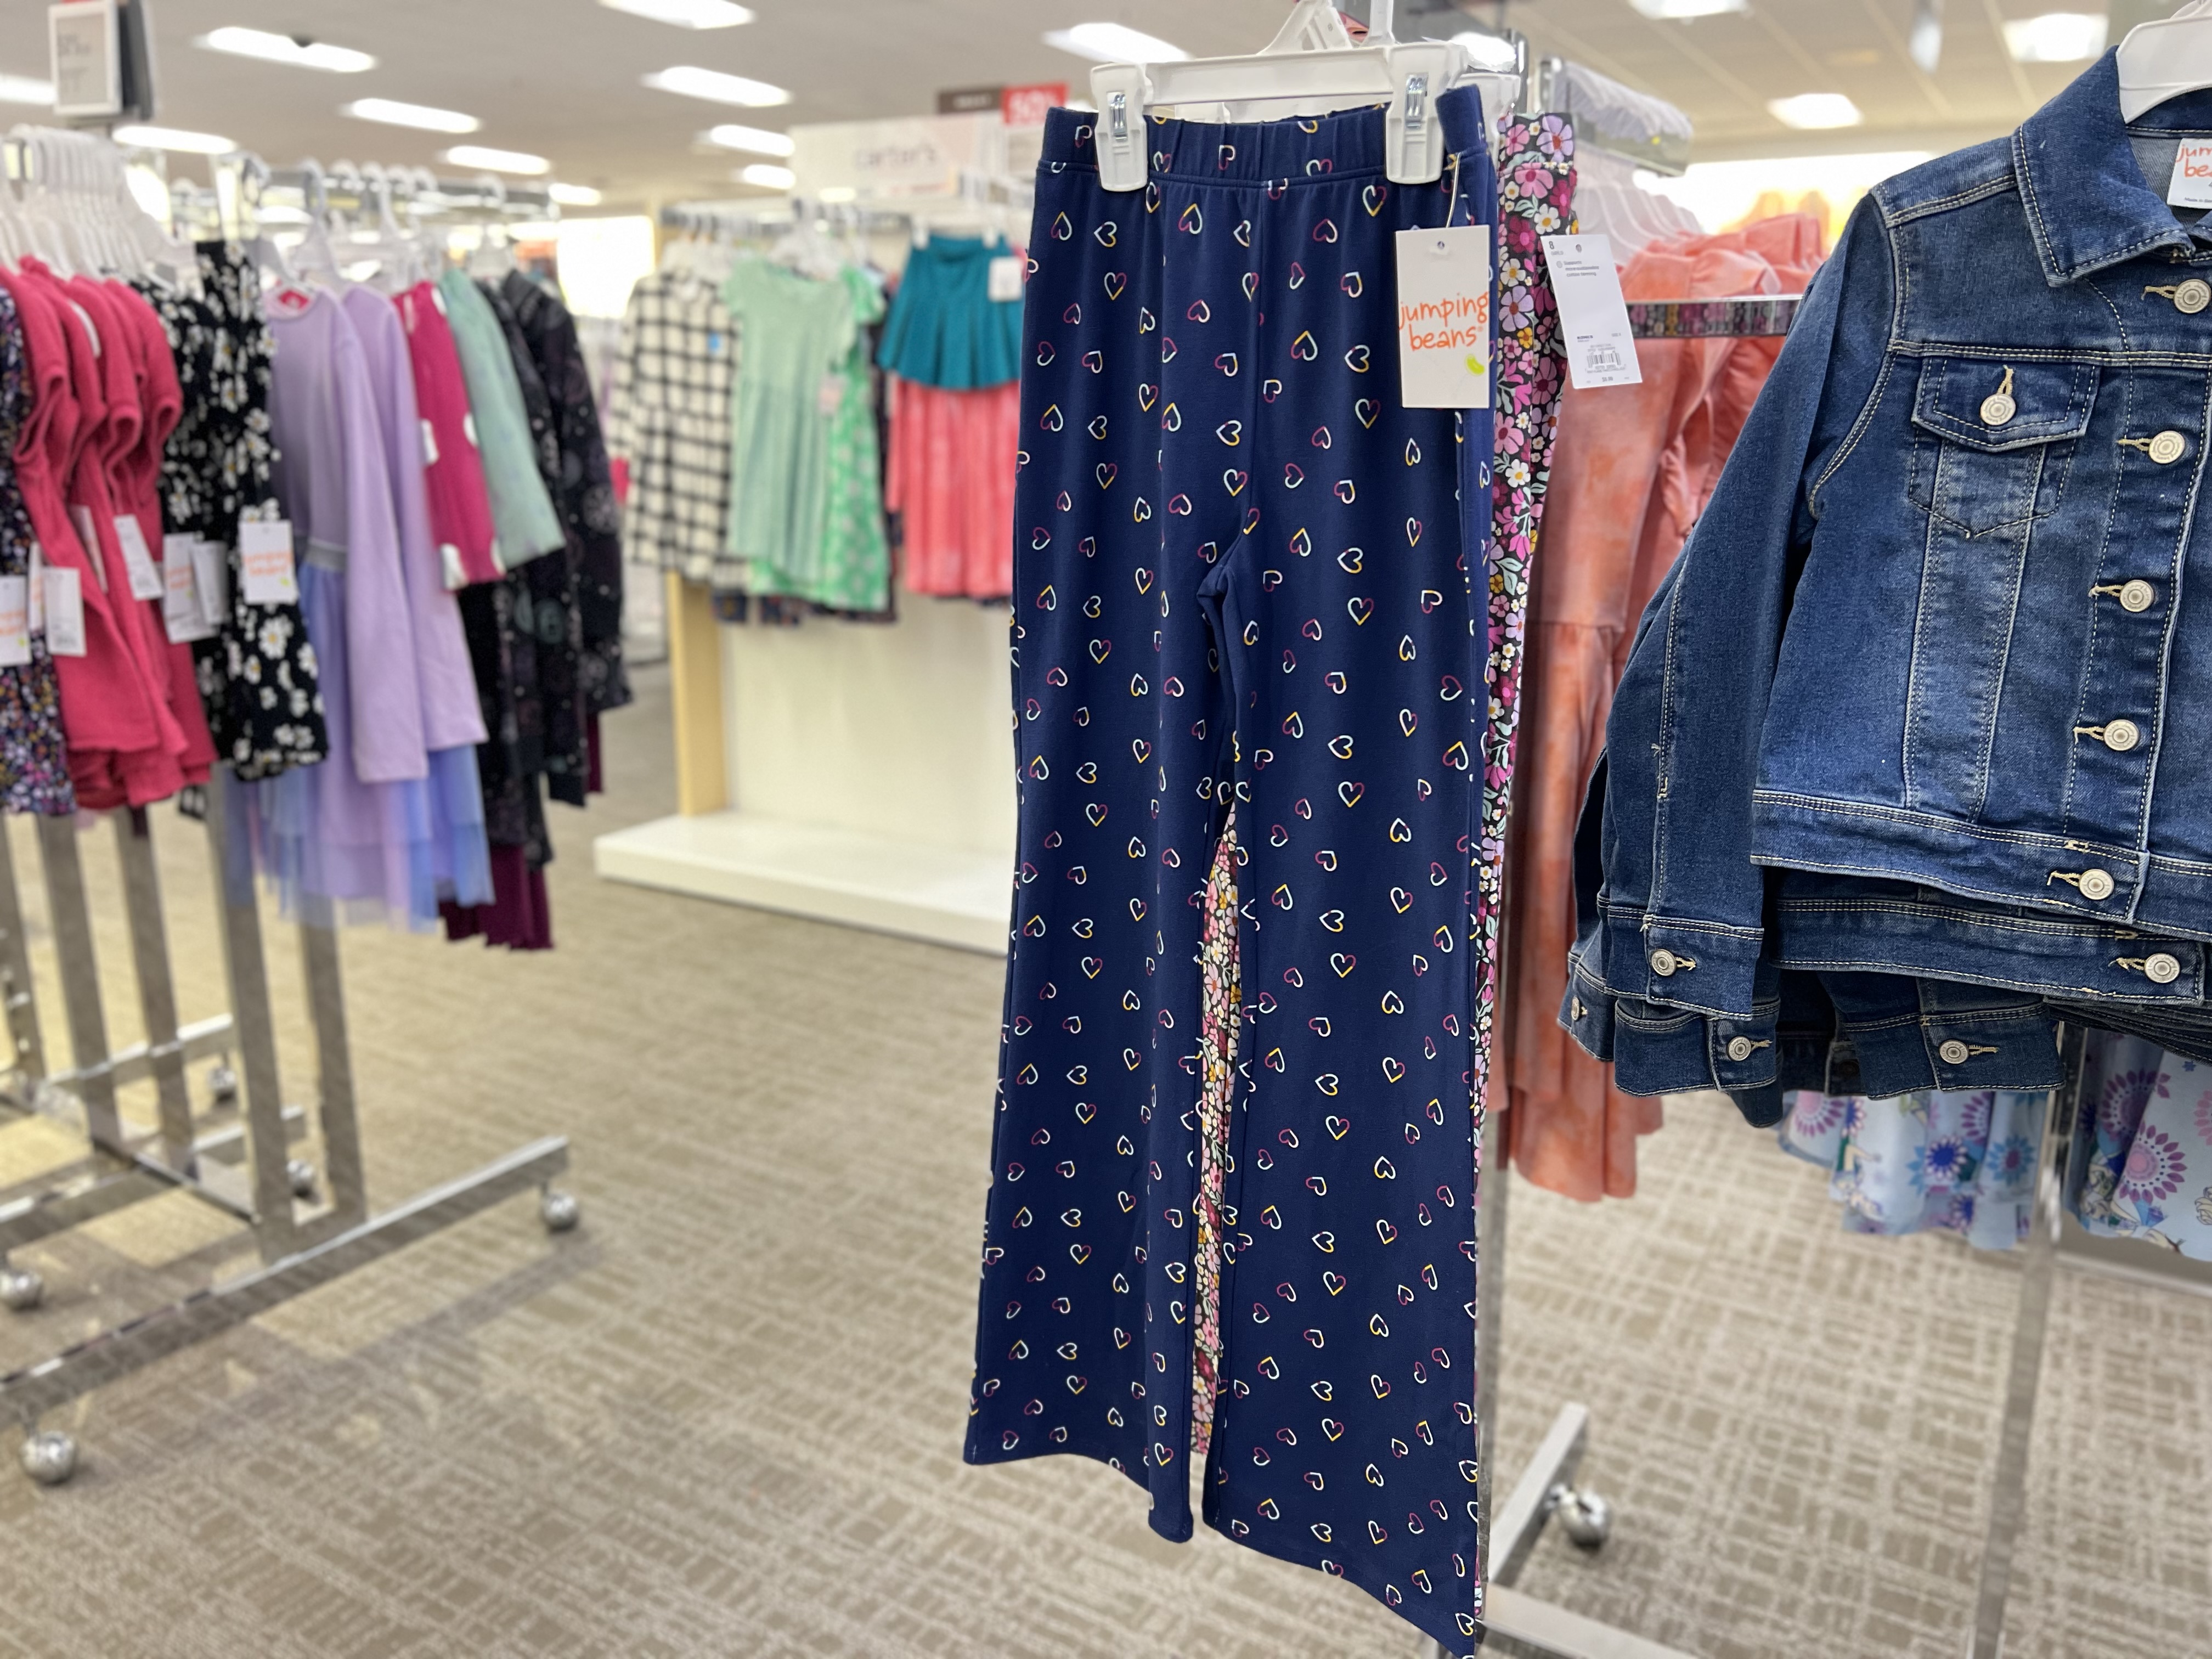 Jumping Beans Girls pants in store